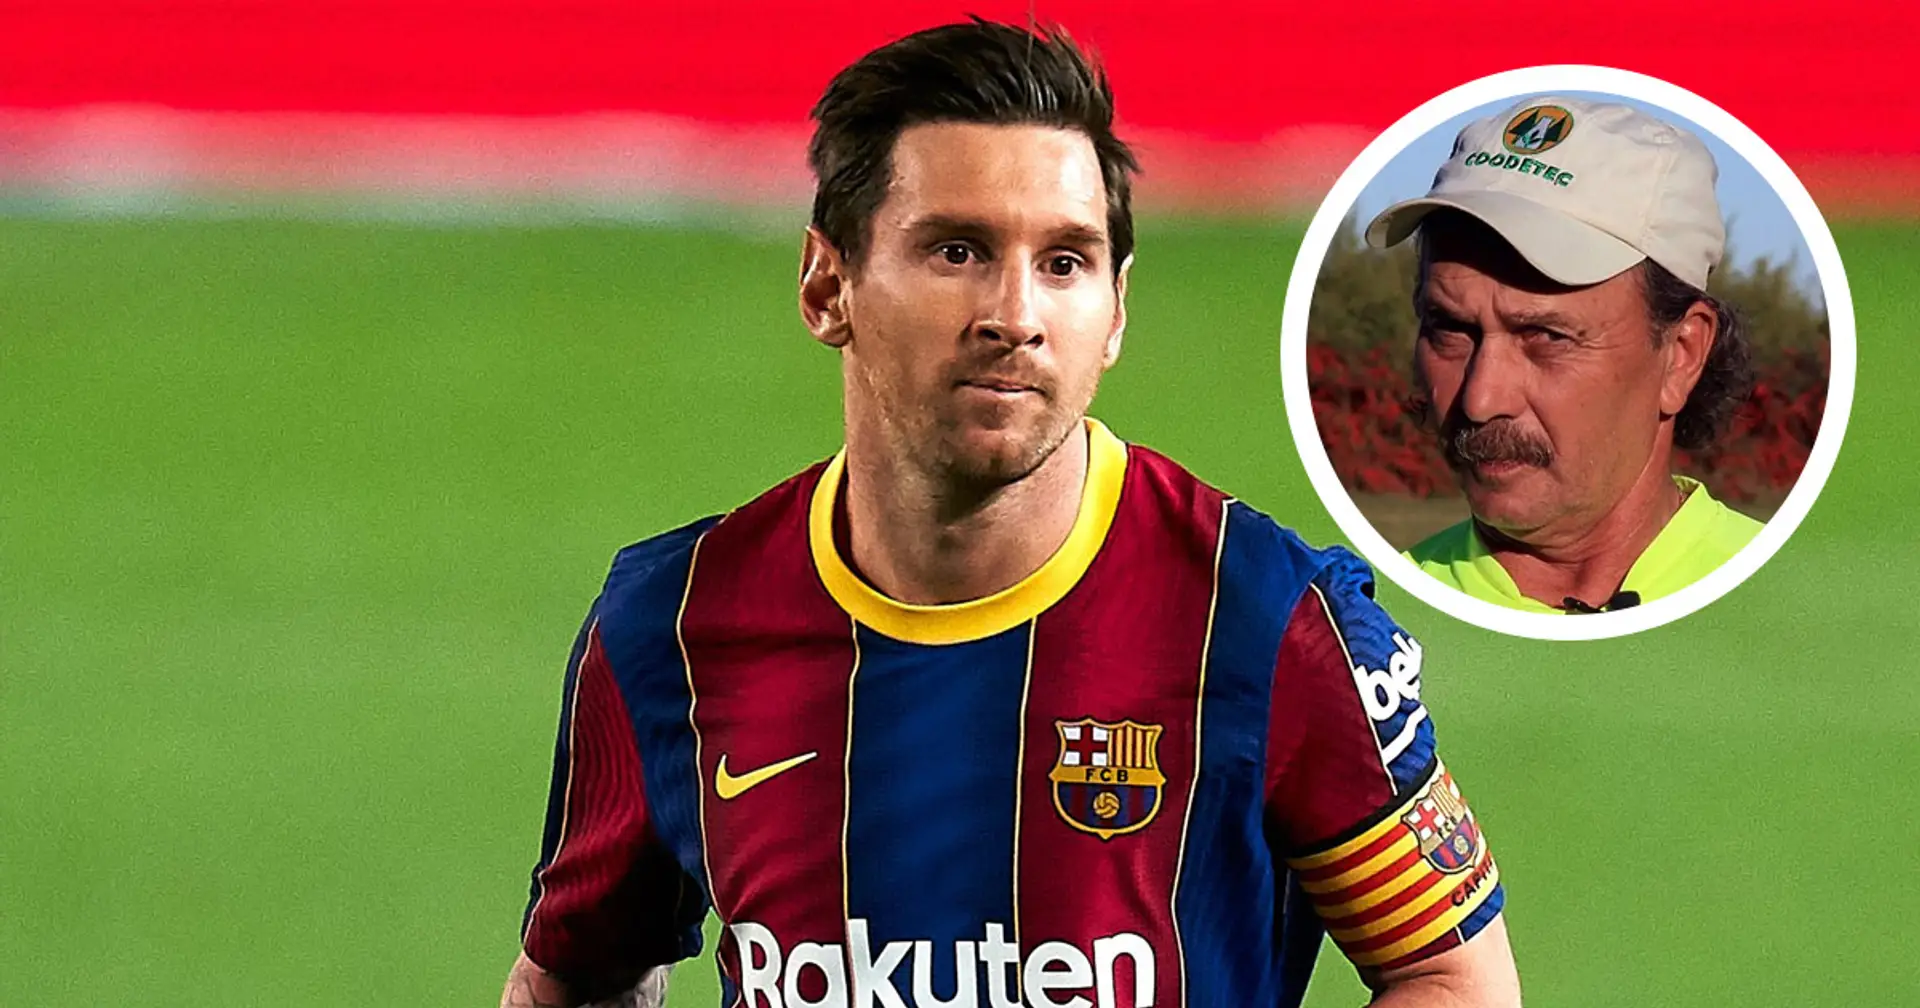 Messi once dribbled past whole team including goalkeeper but didn't kick ball into empty net – heartwarming story told by Leo's late ex-coach